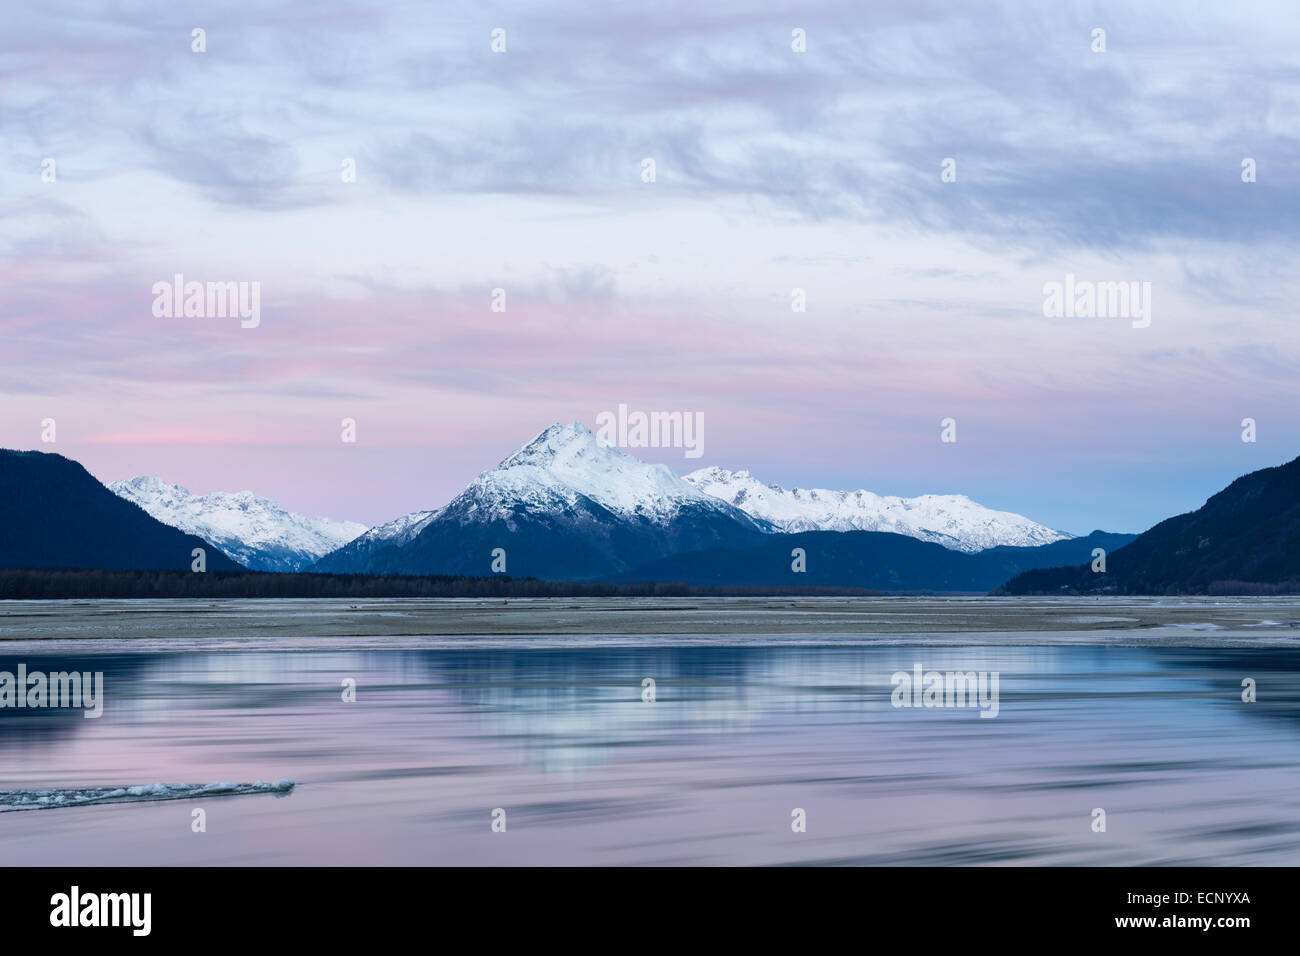 Alpenglow at sunrise along the Chilkat River with the Chilkat Mountains in the Chilkat Bald Eagle Preserve in Haines, Alaska. Stock Photo